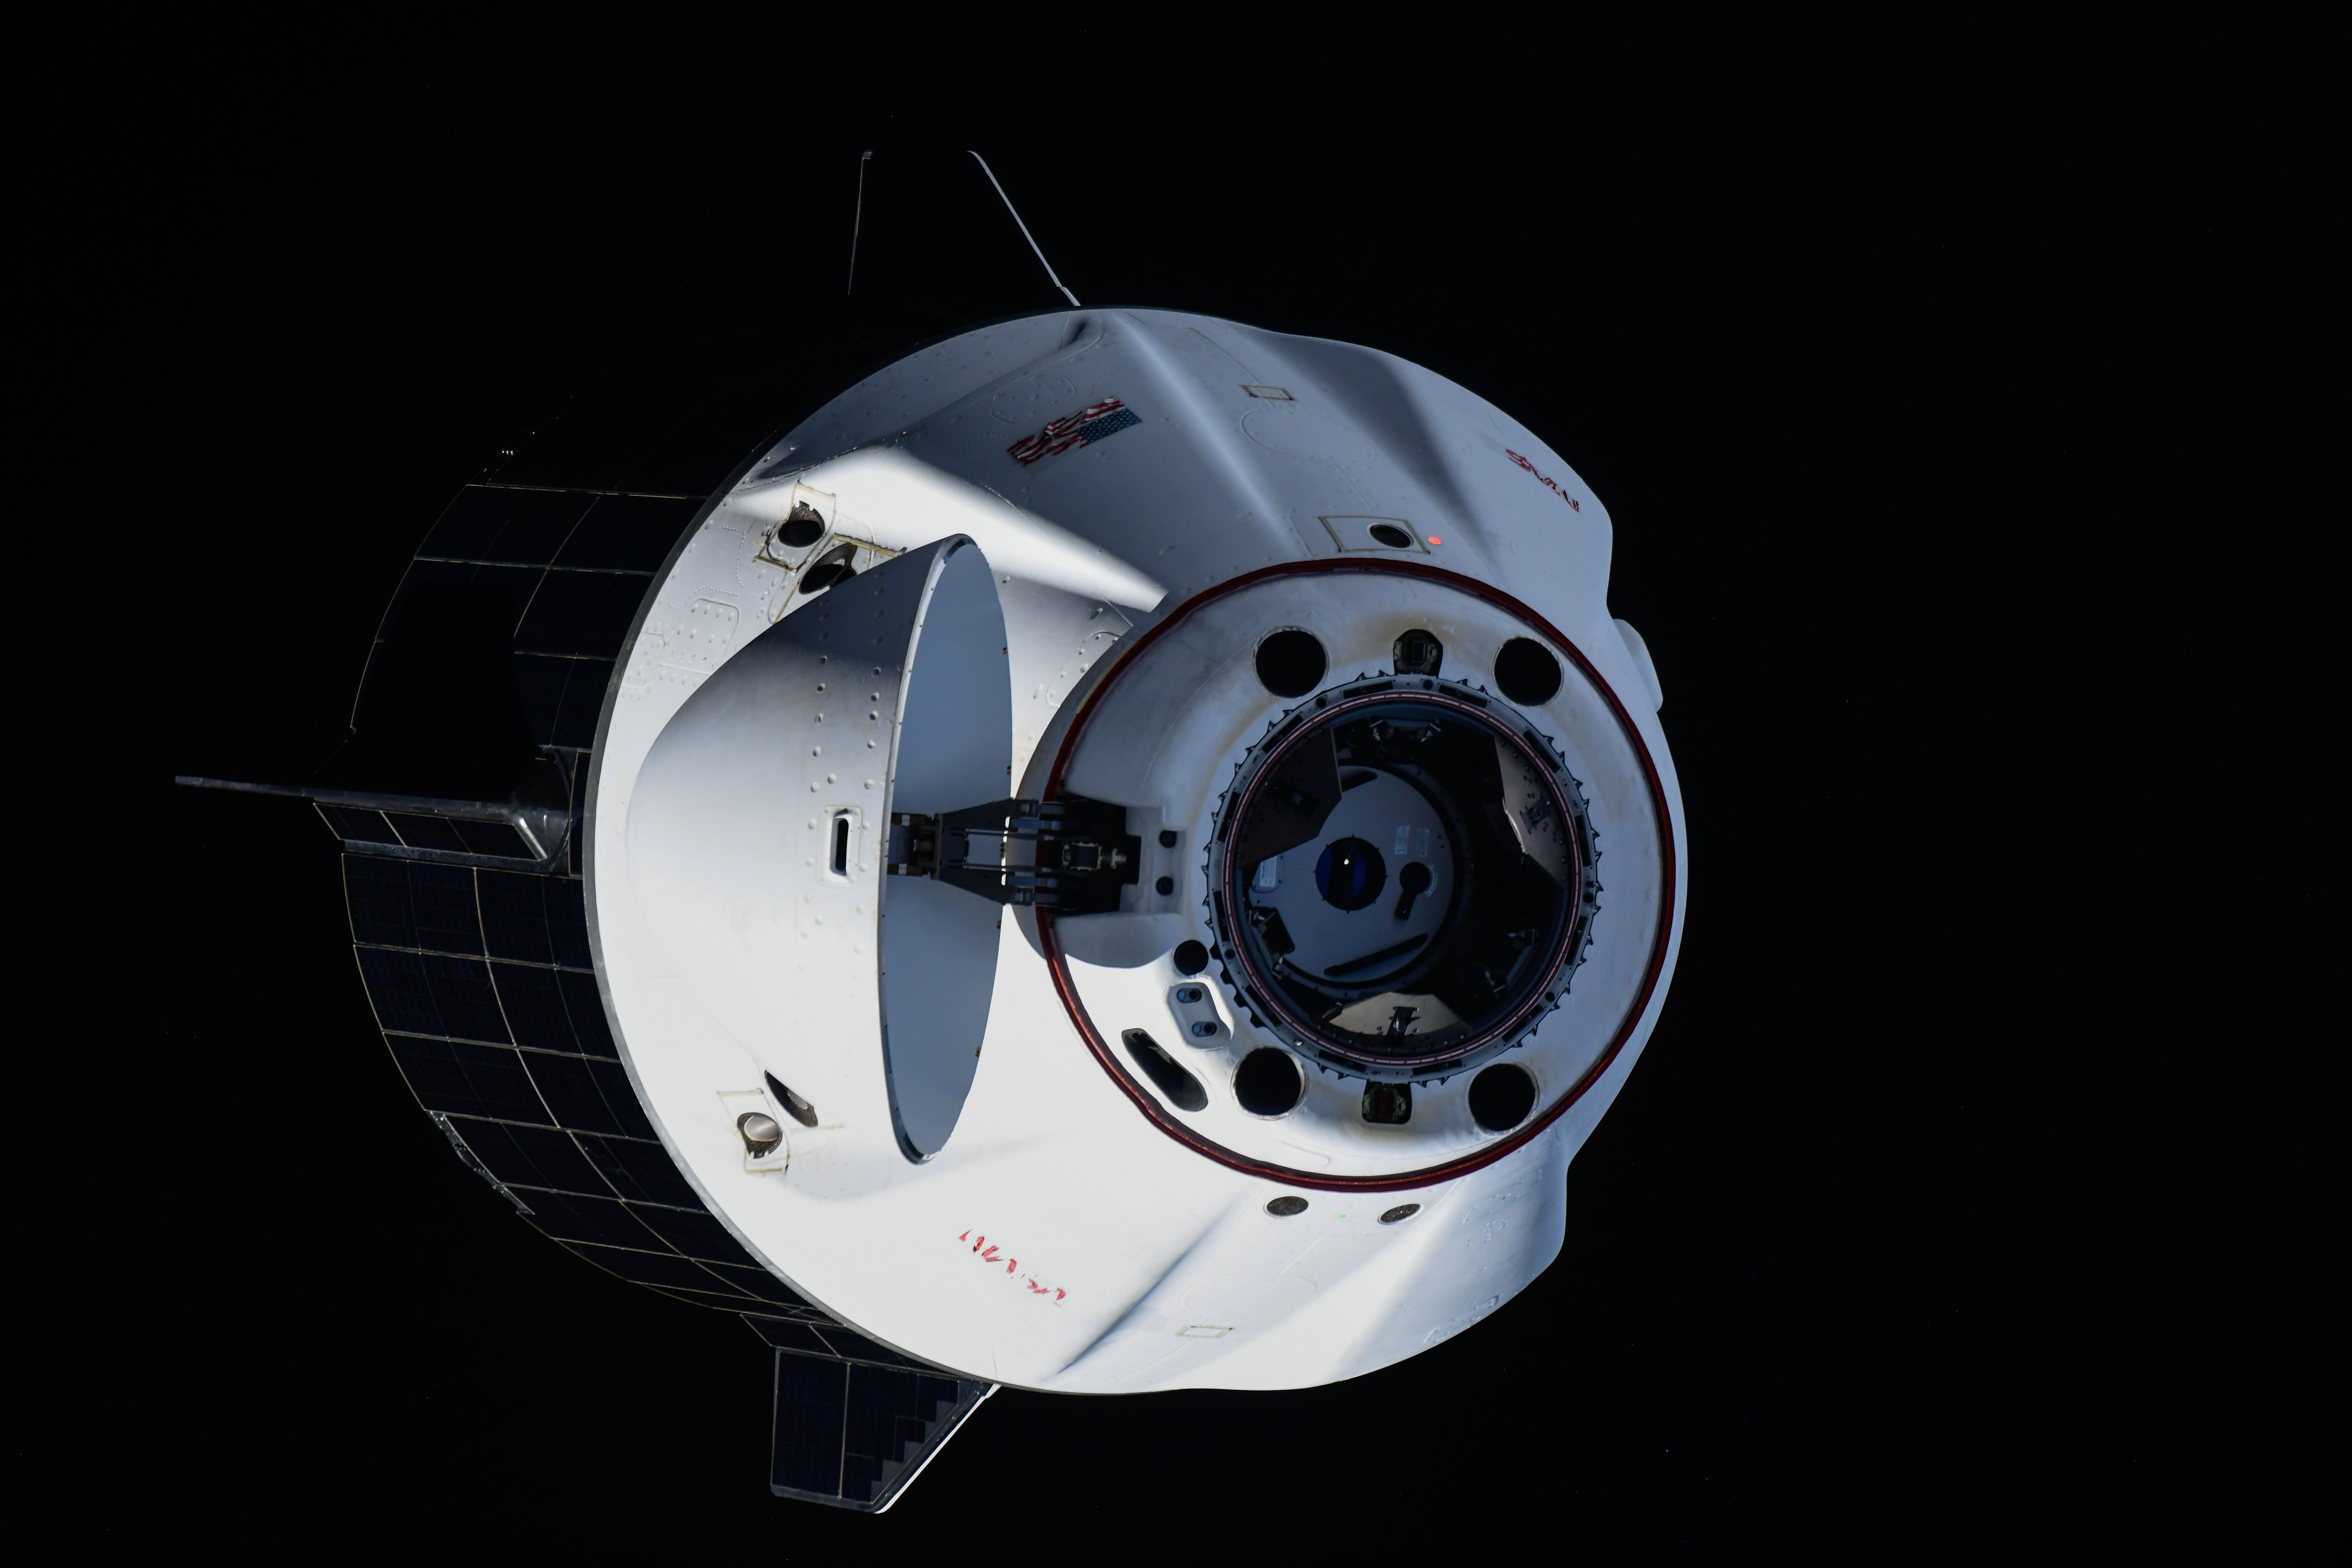 Friends Of NASA SpaceX Dragon Endeavour Spacecraft Relocation International Space Station